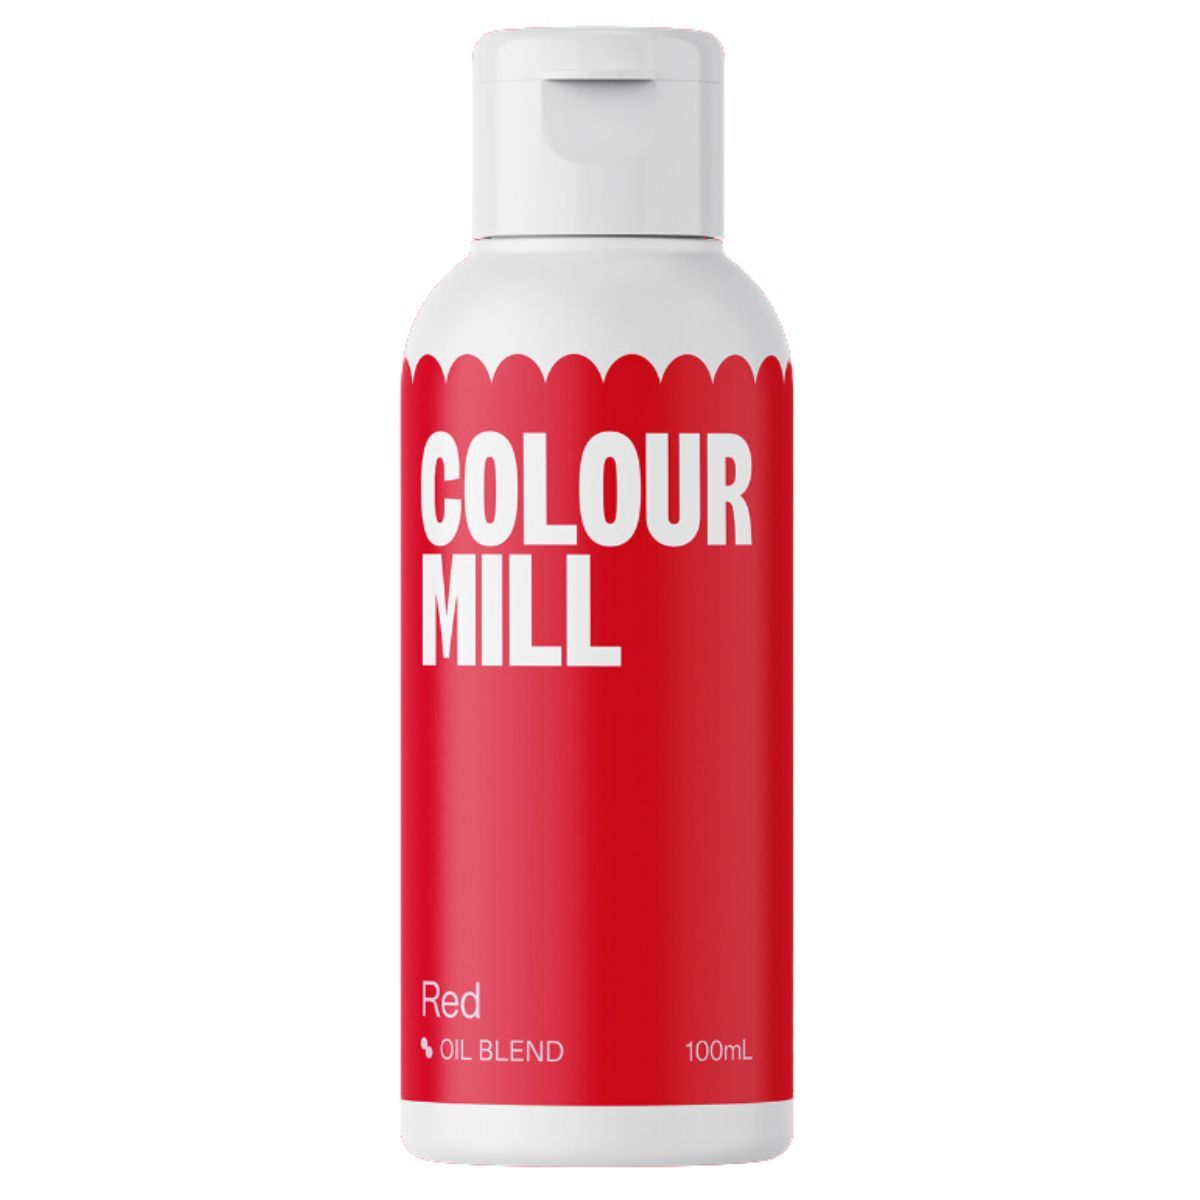  Foto: COLOUR MILL OIL BLEND RED 100 ML